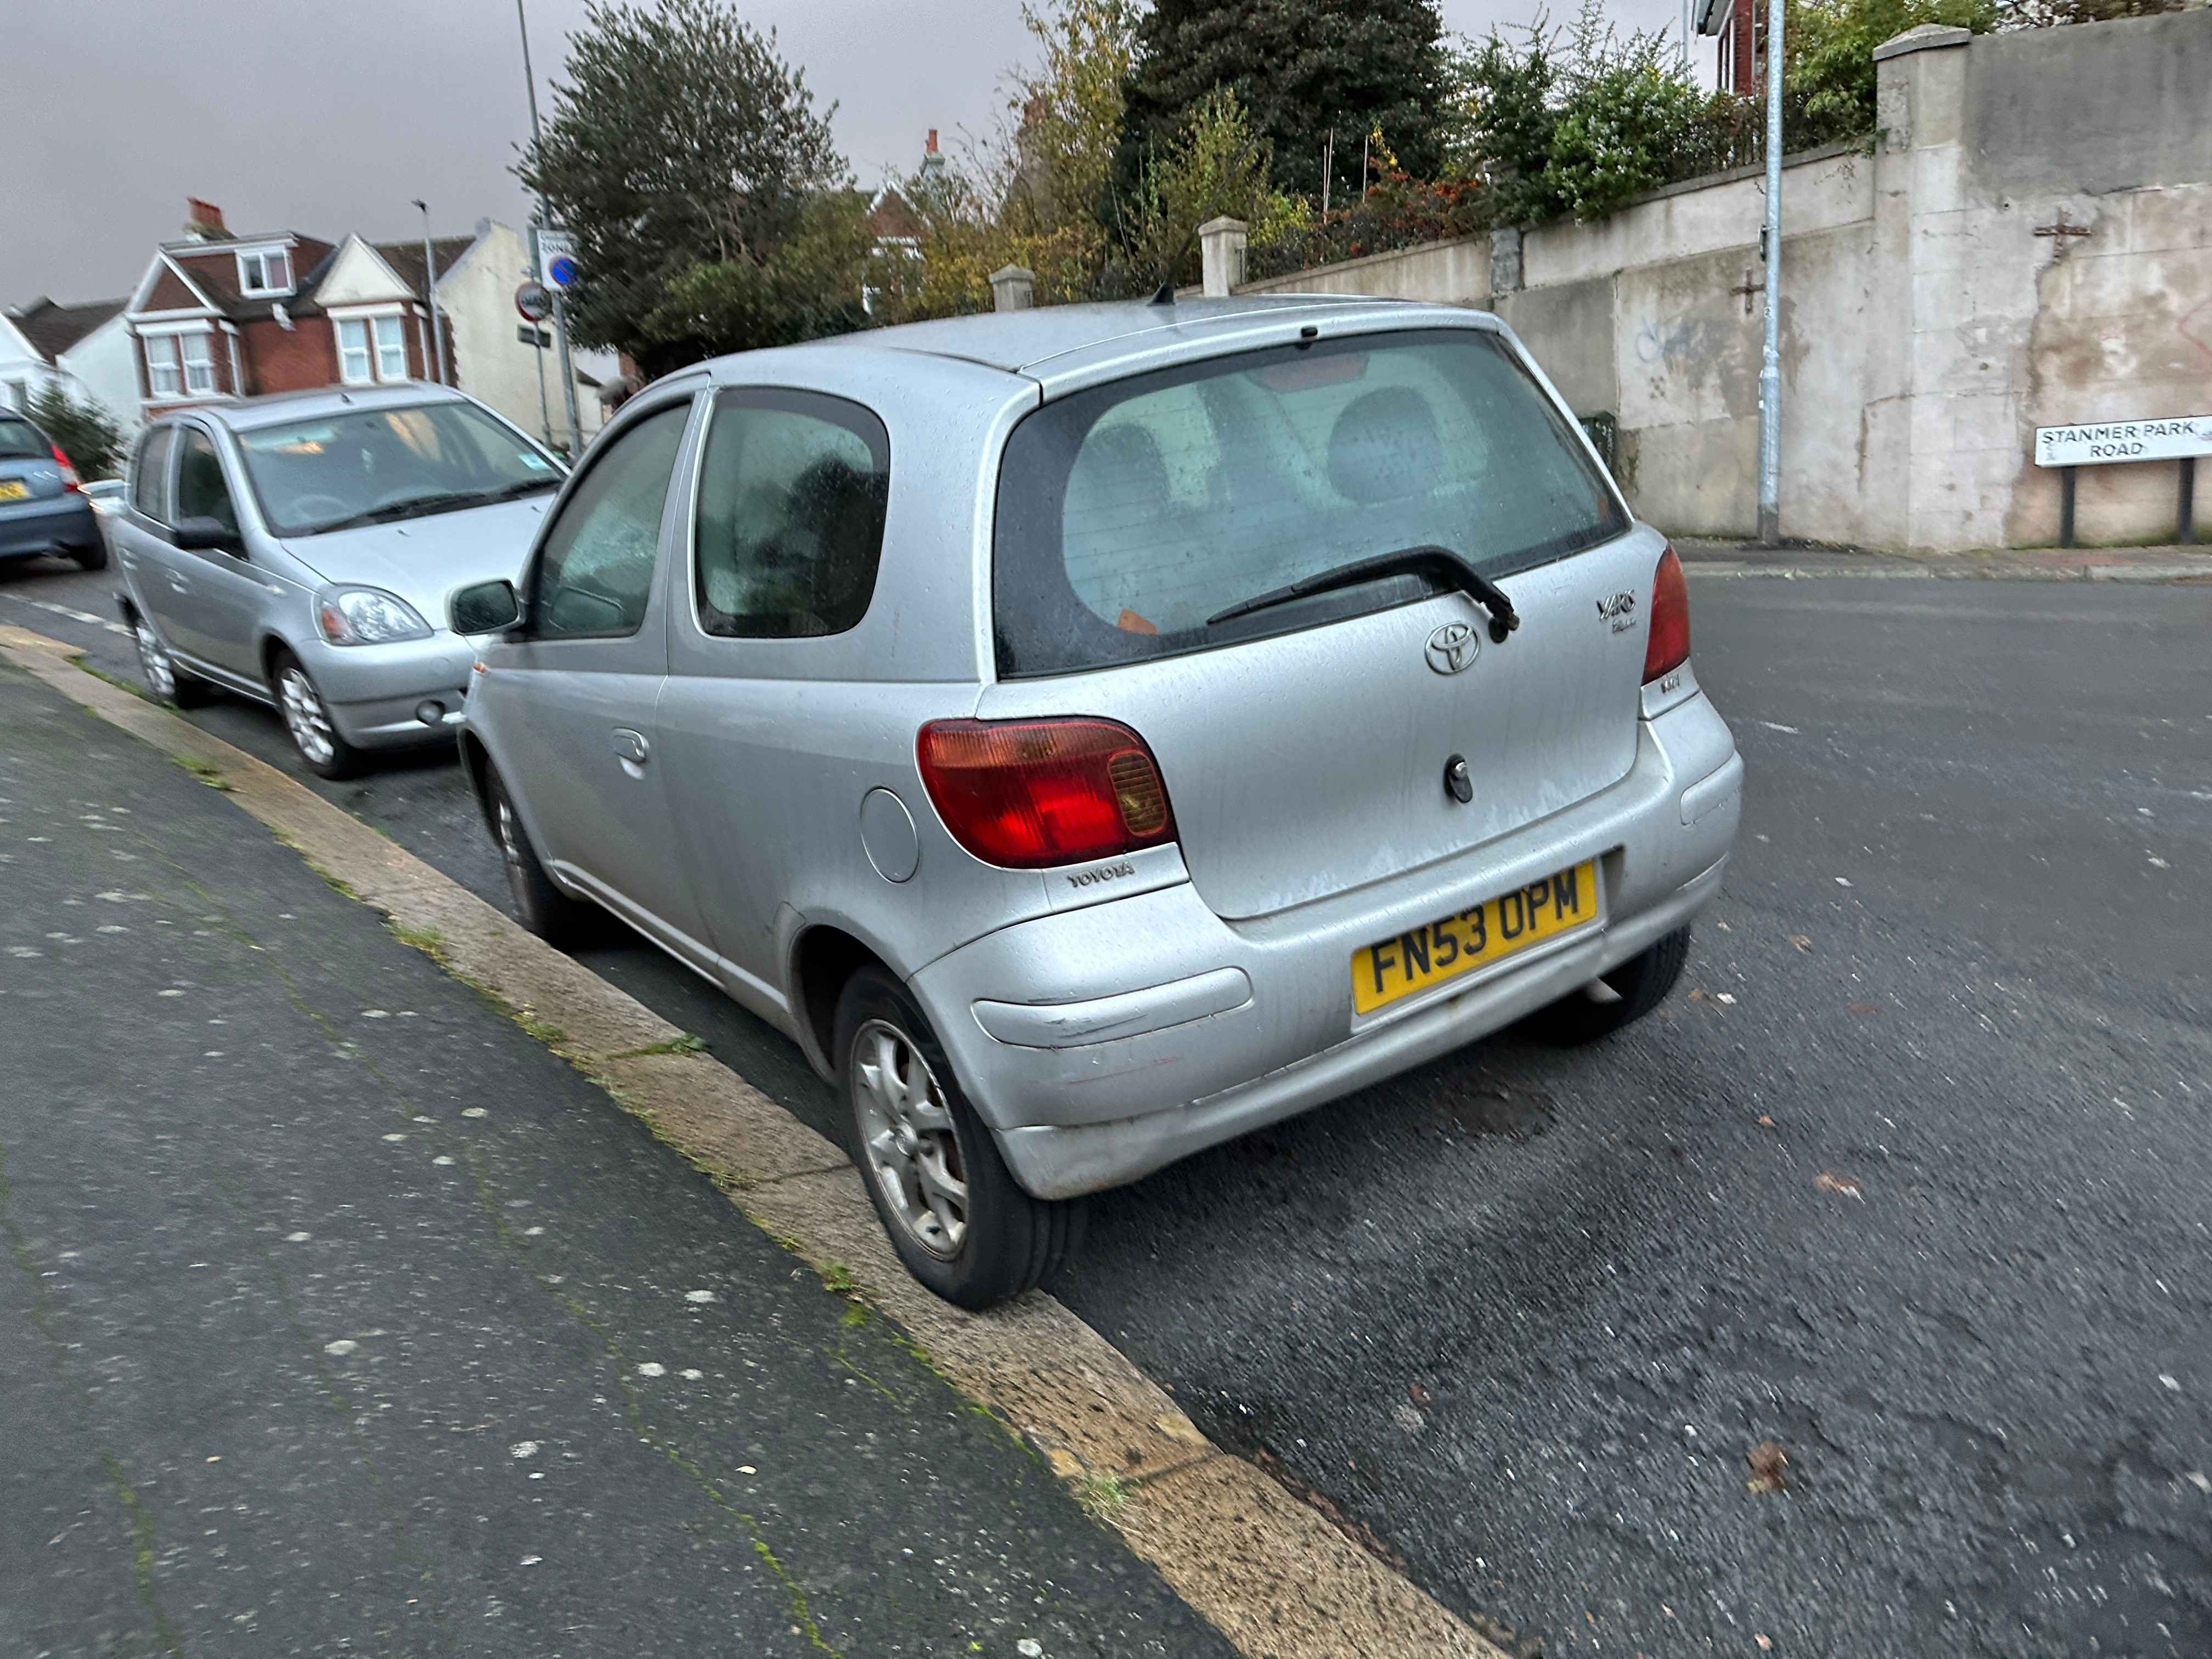 Photograph of FN53 OPM - a Silver Toyota Yaris parked in Hollingdean by a non-resident. The fourth of five photographs supplied by the residents of Hollingdean.